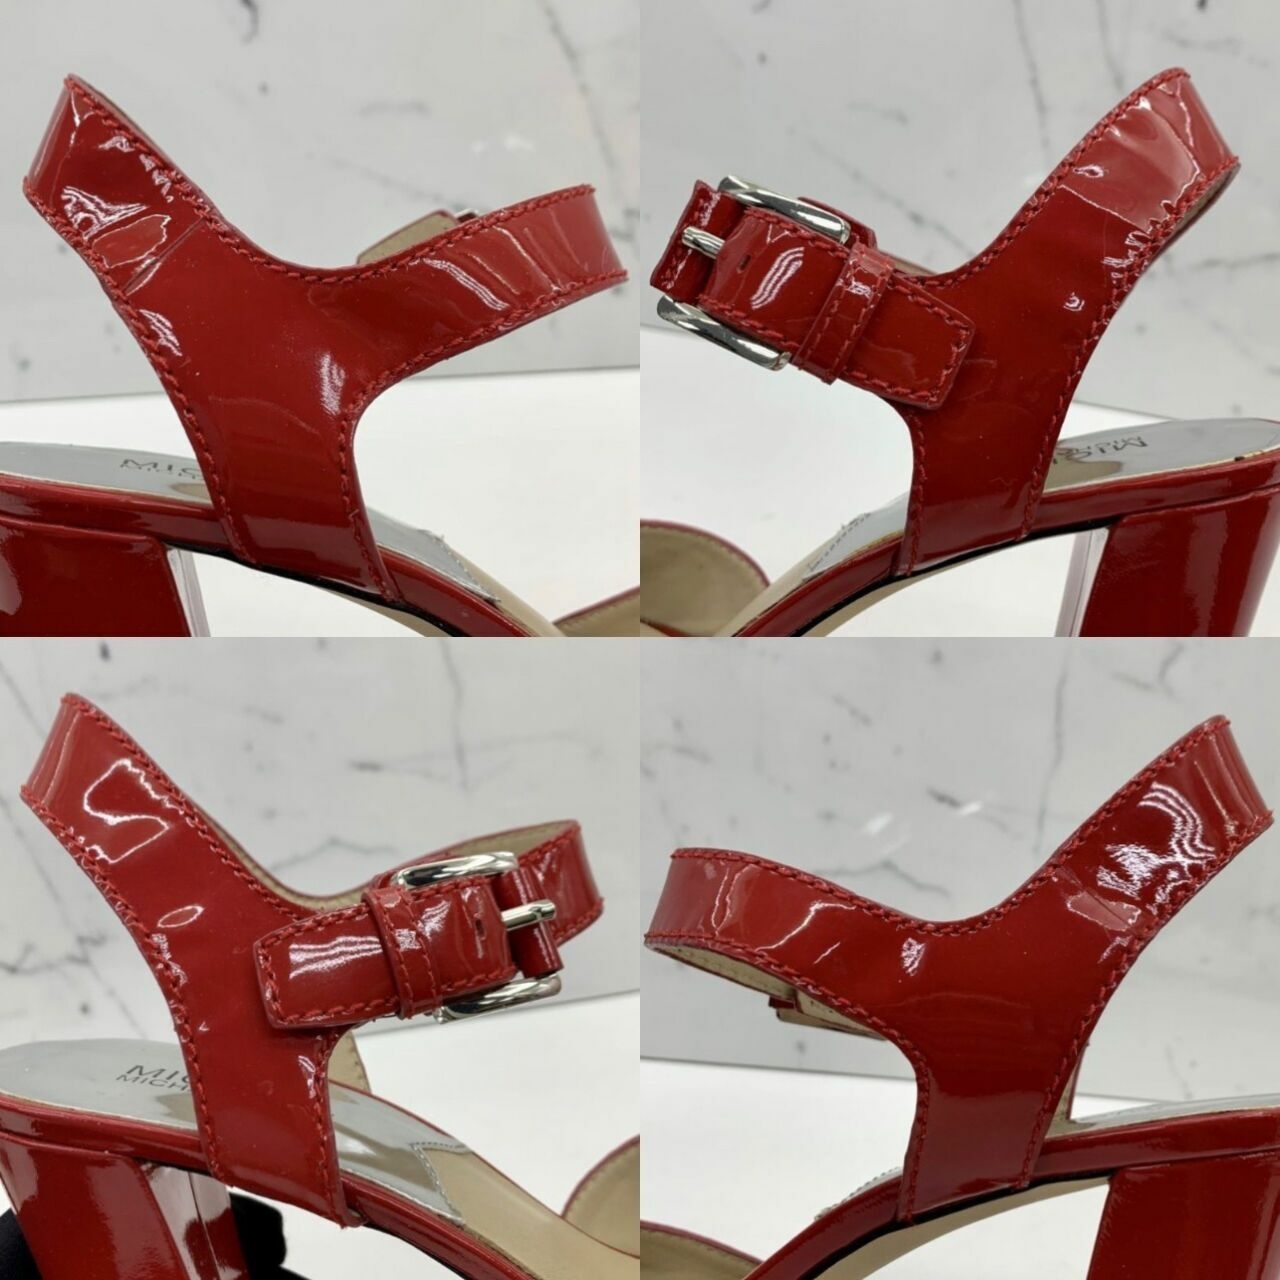 Michael Kors Patent Red Sandals Strappy Heels